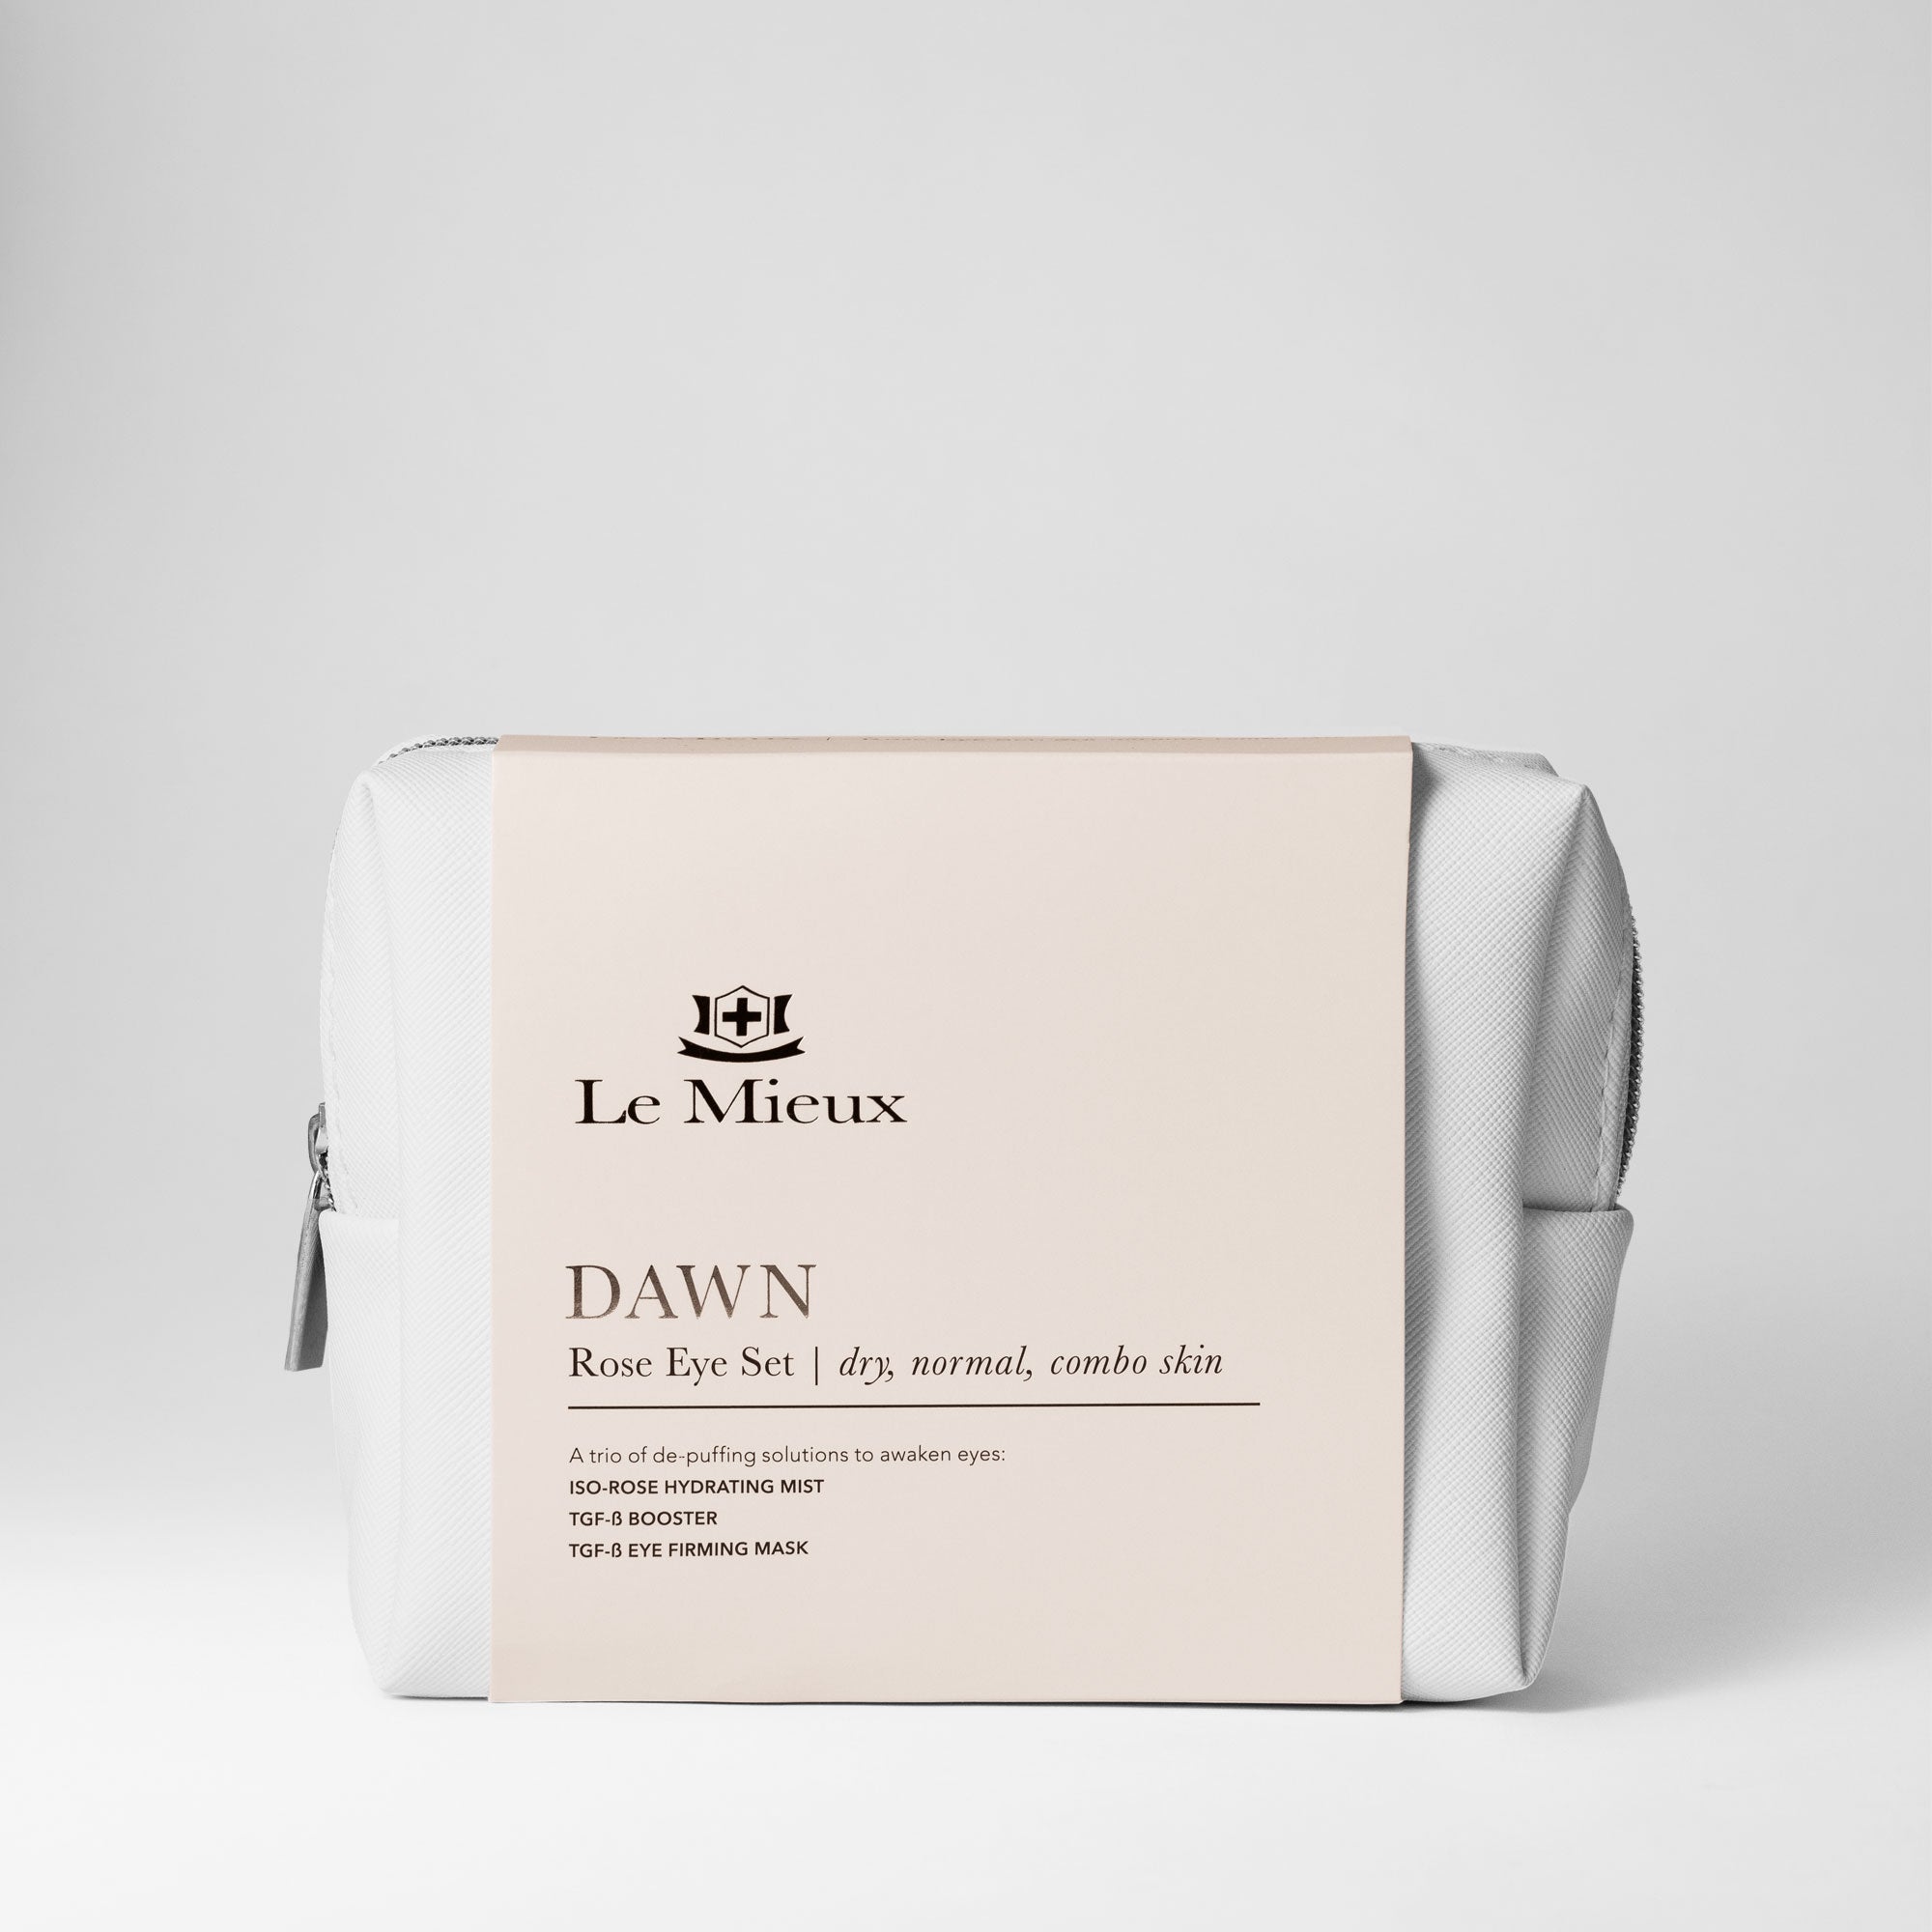  DAWN ROSE EYE SET from Le Mieux Skincare - 1